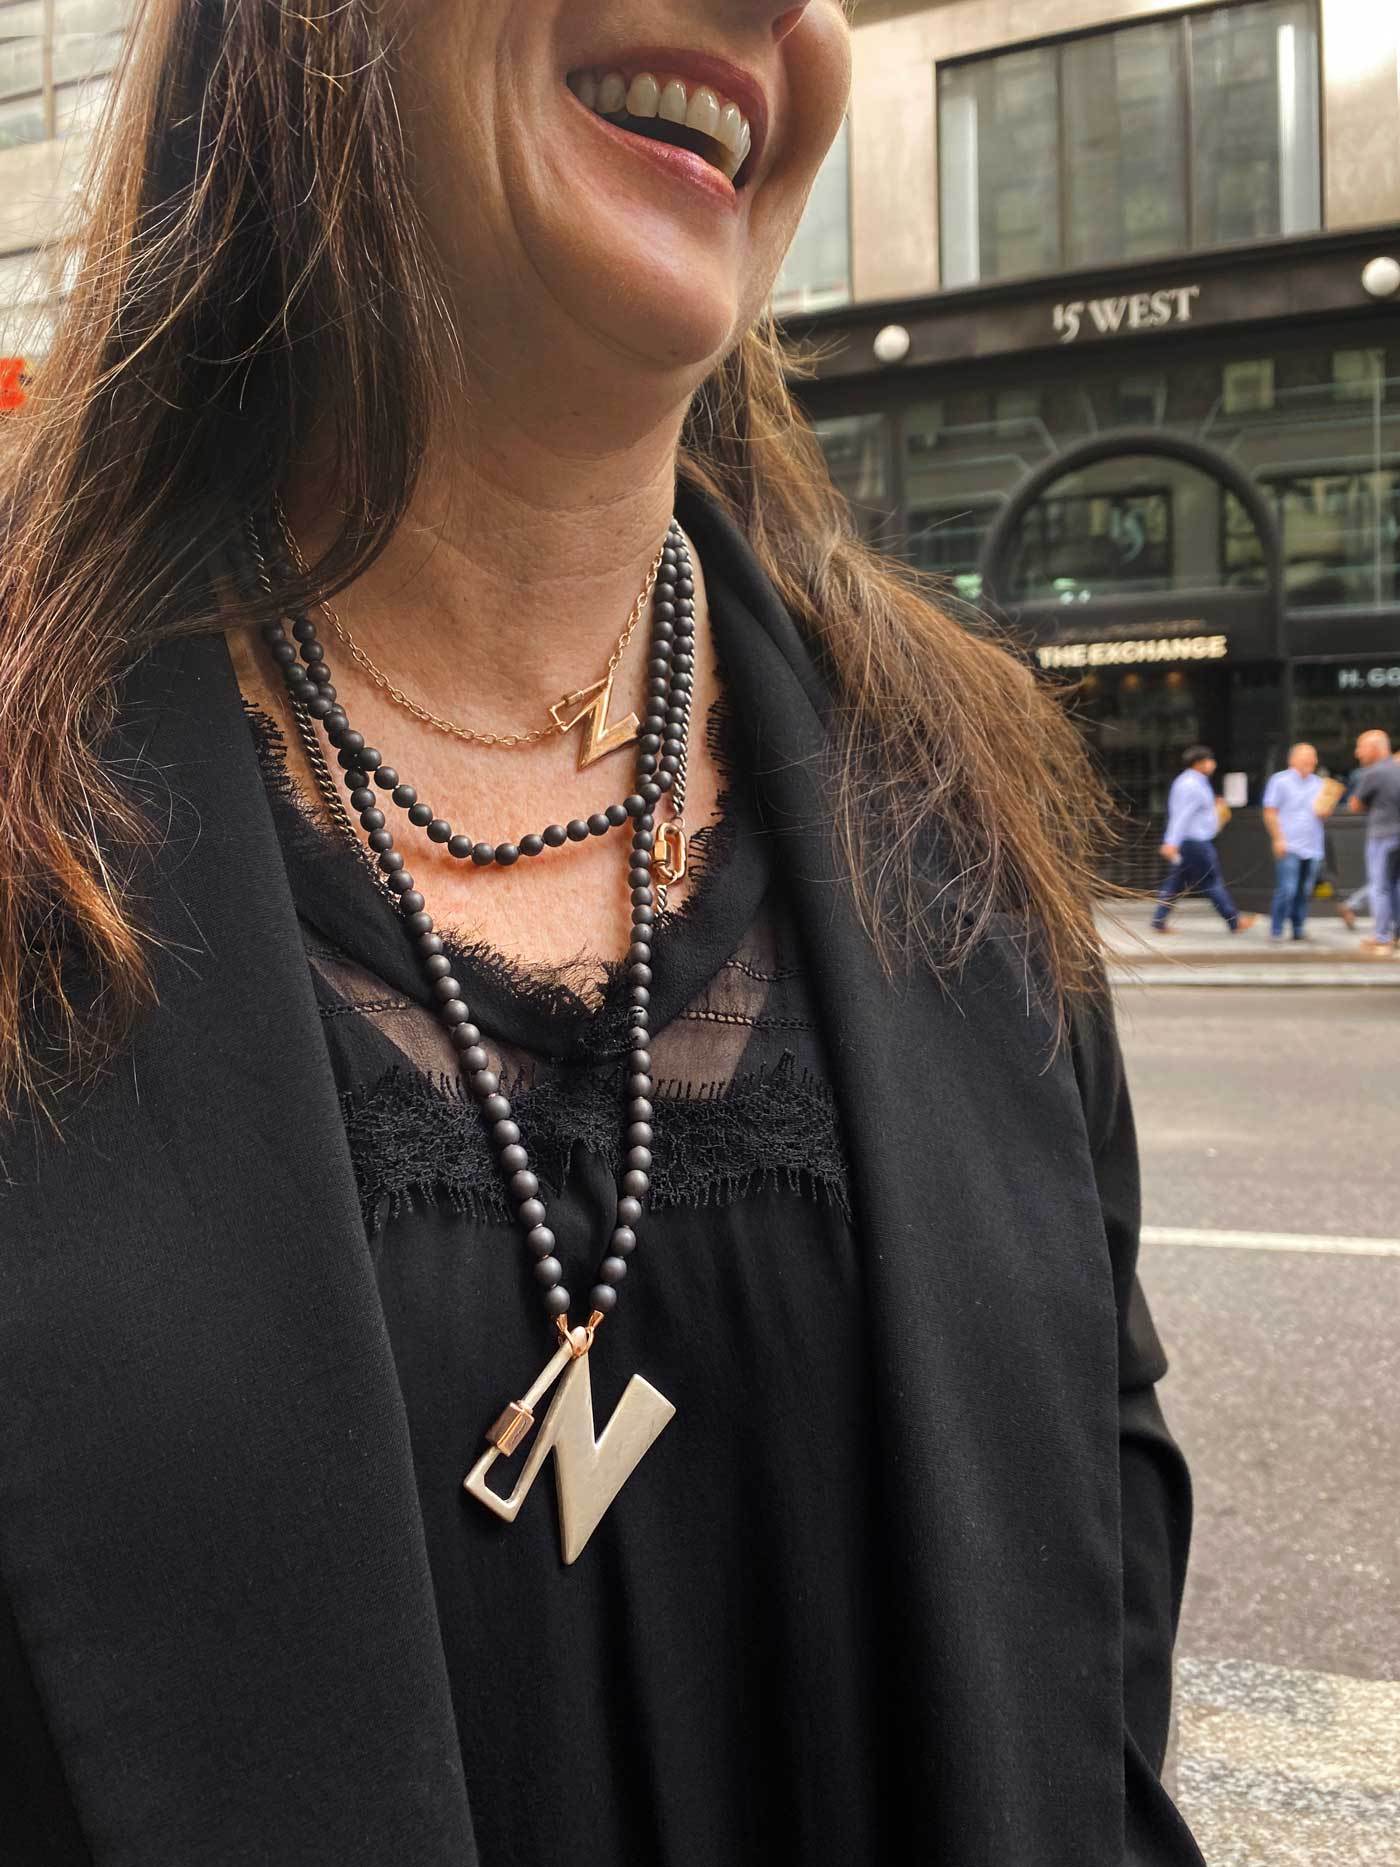 Close up of woman's decolletage wearing necklace with N lock